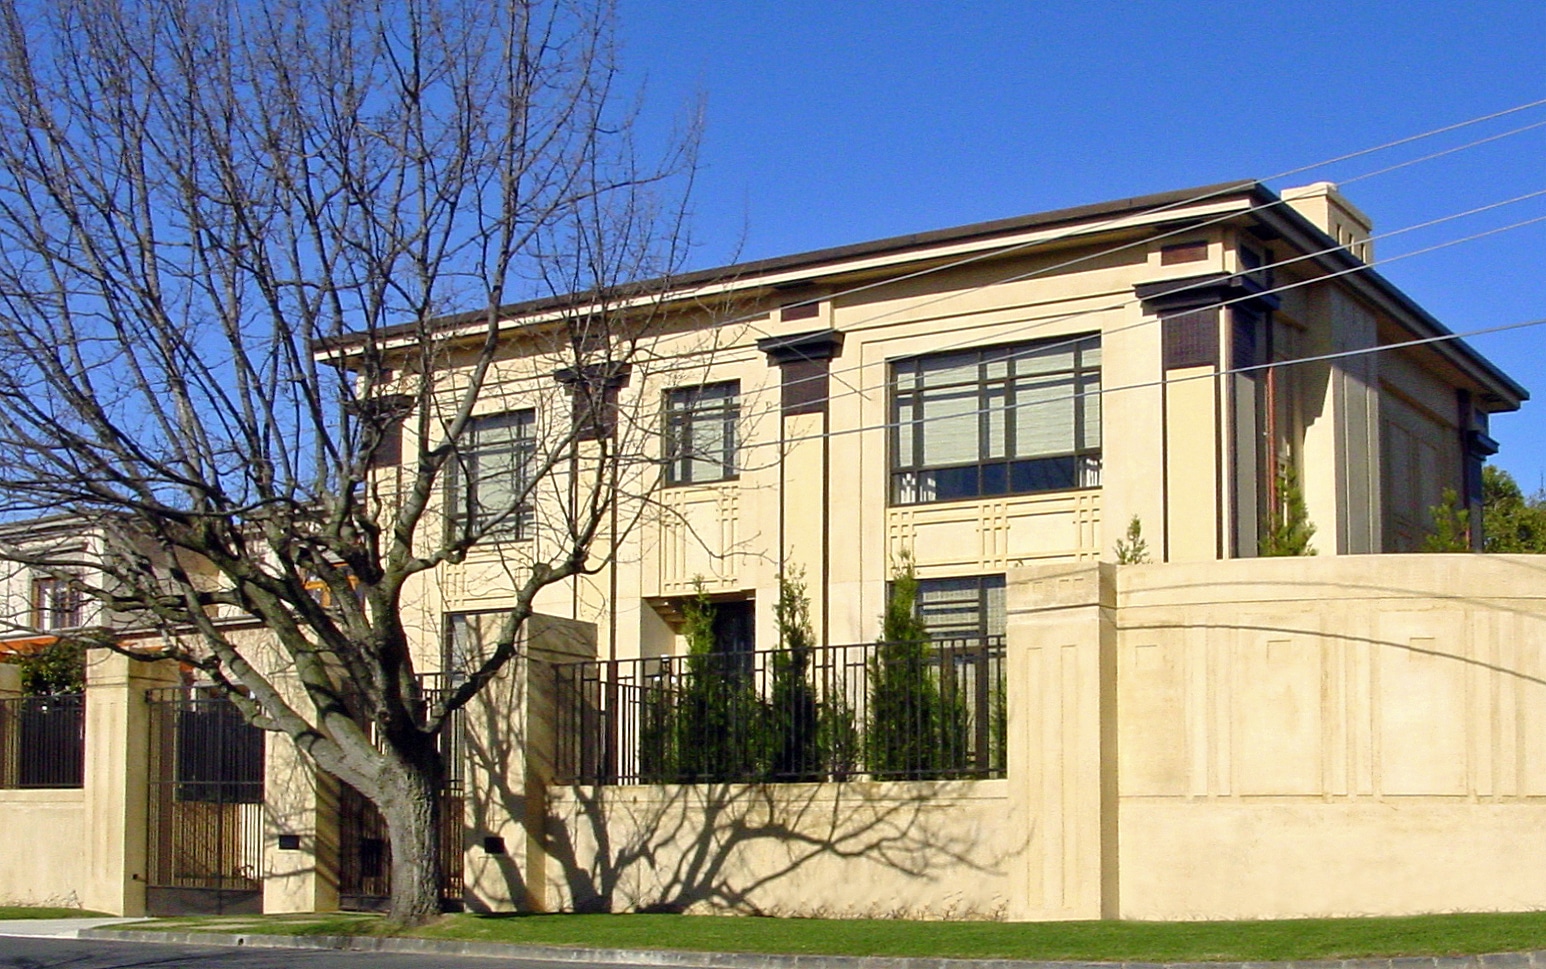 72dpi NeoClassical Toorak H 0000 1 - Residential Architecture Projects